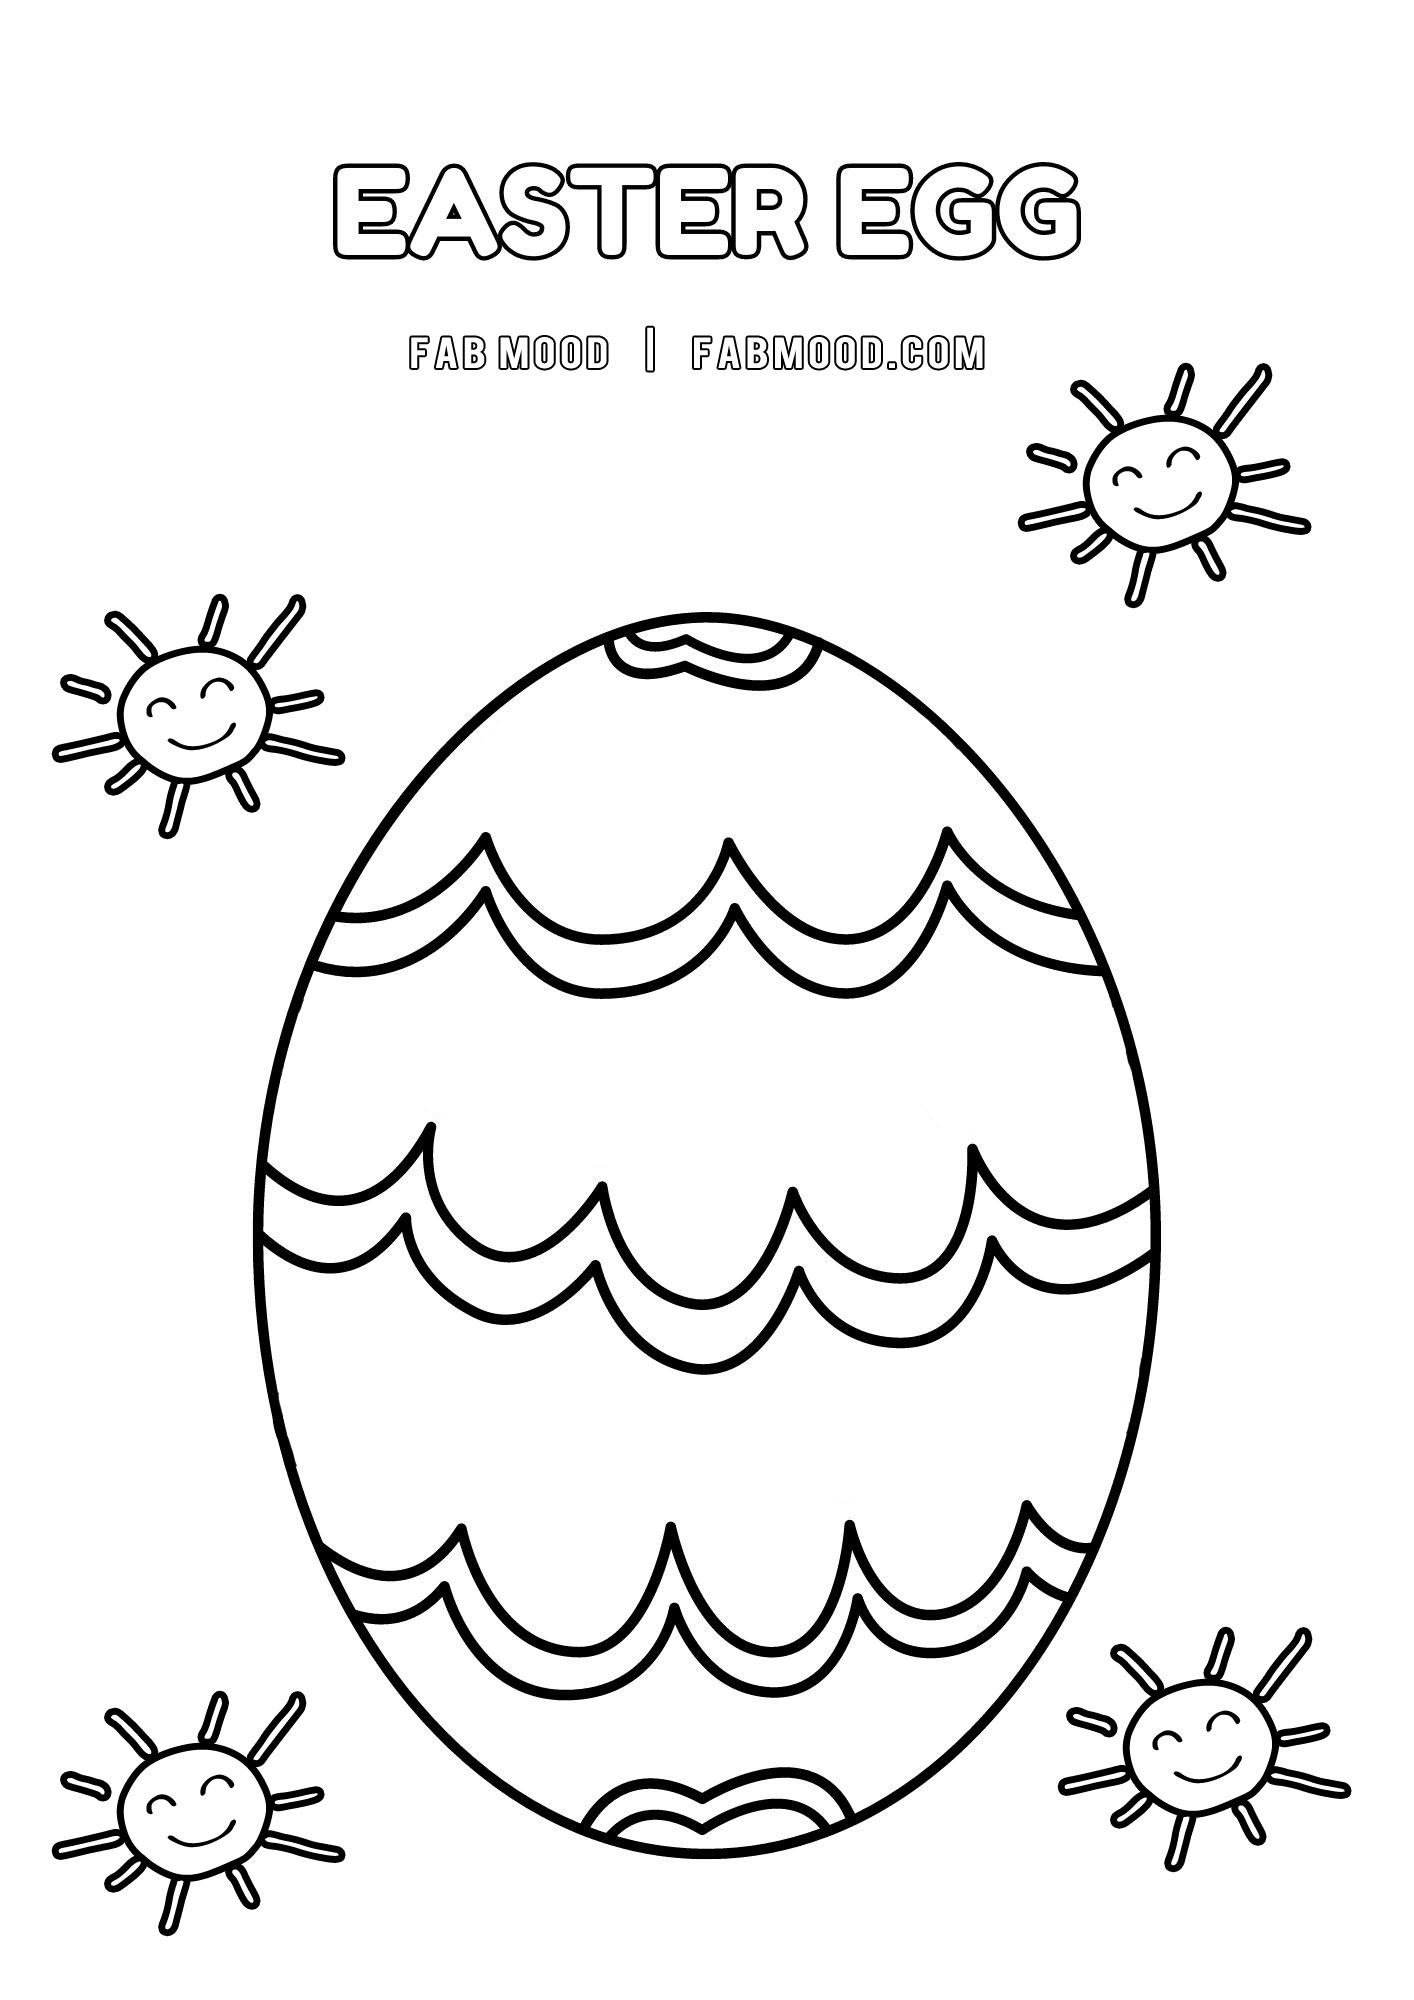 FREE 10 Easter Colouring Pictures : Easter Egg Extravaganza